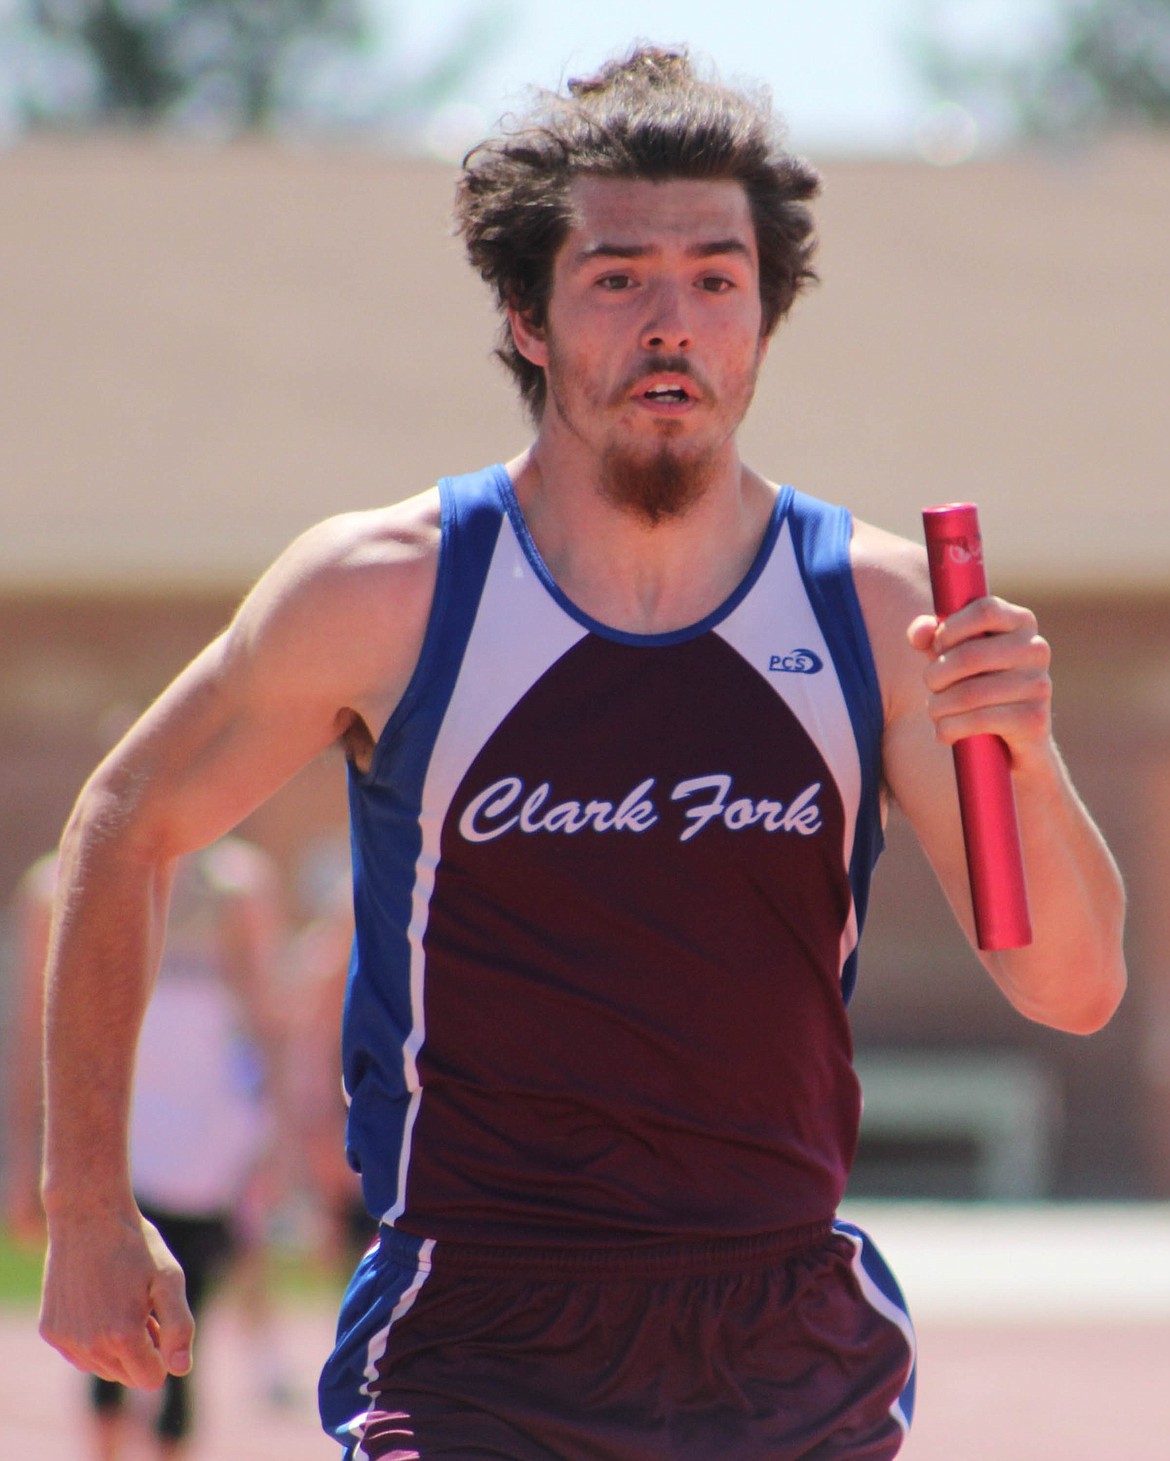 JESSE SHASKE runs in the 4x100 relay at the Kim Haines Invitational in Missoula. Clark Fork placed eighth in the event with a time of 47:92. (Maggie Dresser/Mineral Independent)